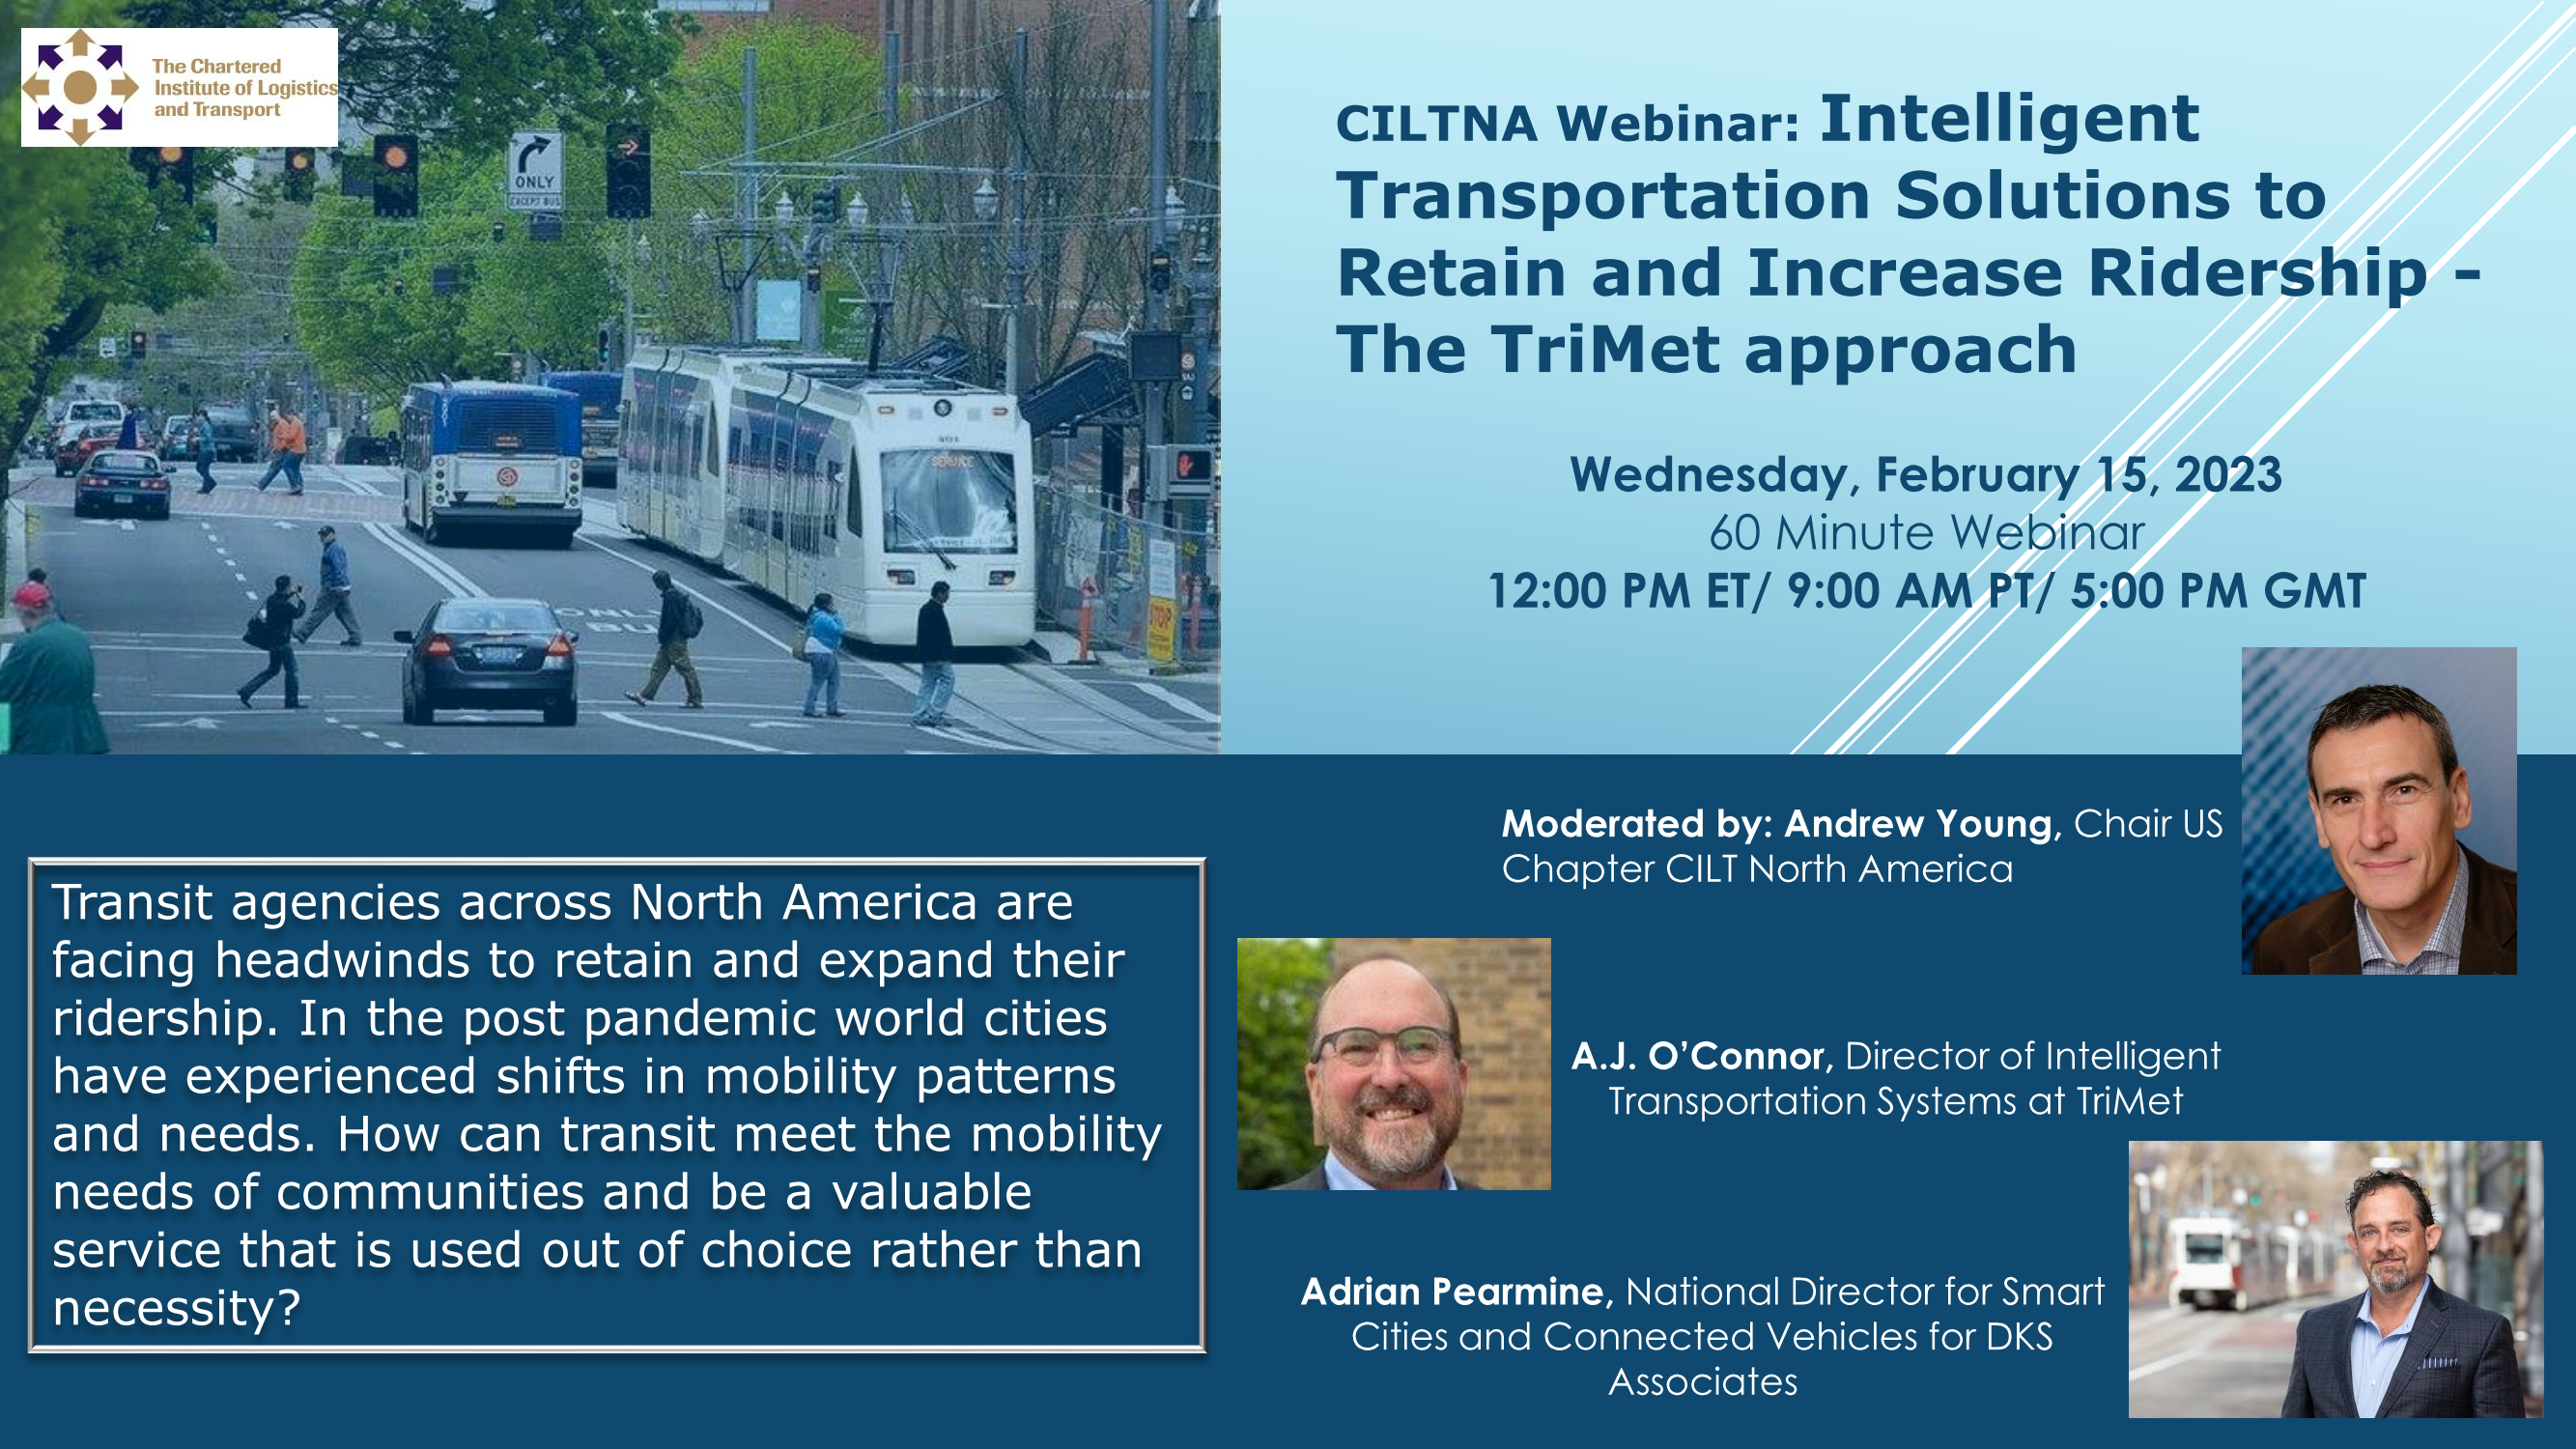 February 15, 2023 - CILTNA Webinar: Intelligent Transportation Solutions to Retain and Increase Ridership - The TriMet approach